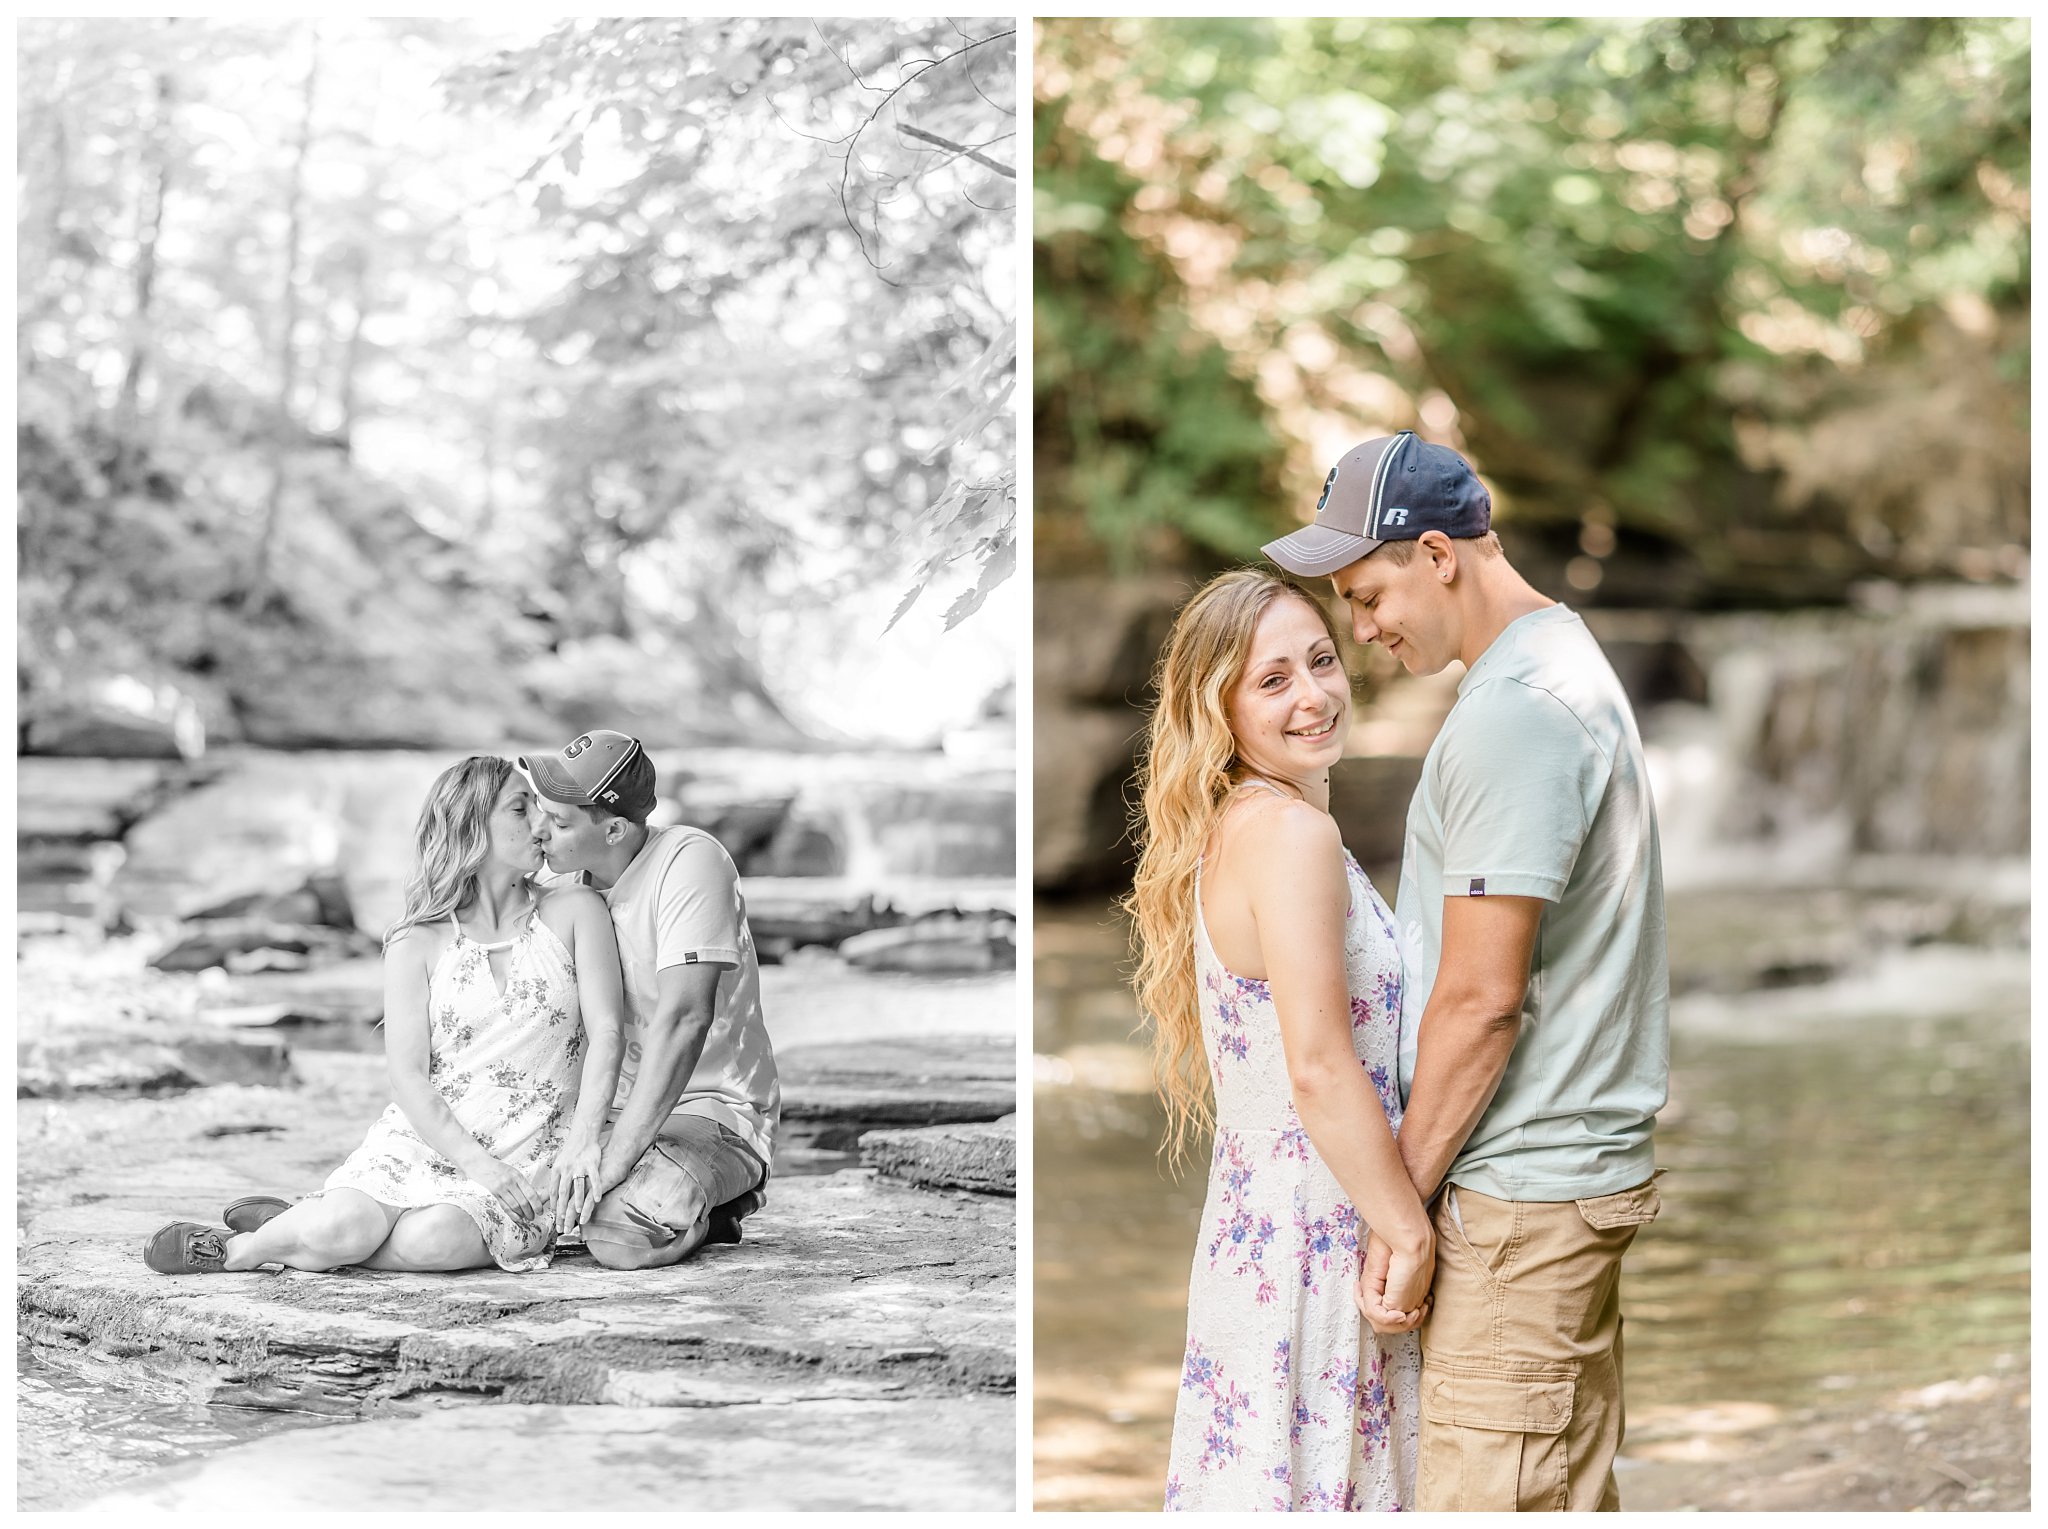 Joanna Young Photography Elizabeth and Cody Engagement Session_0019.jpg